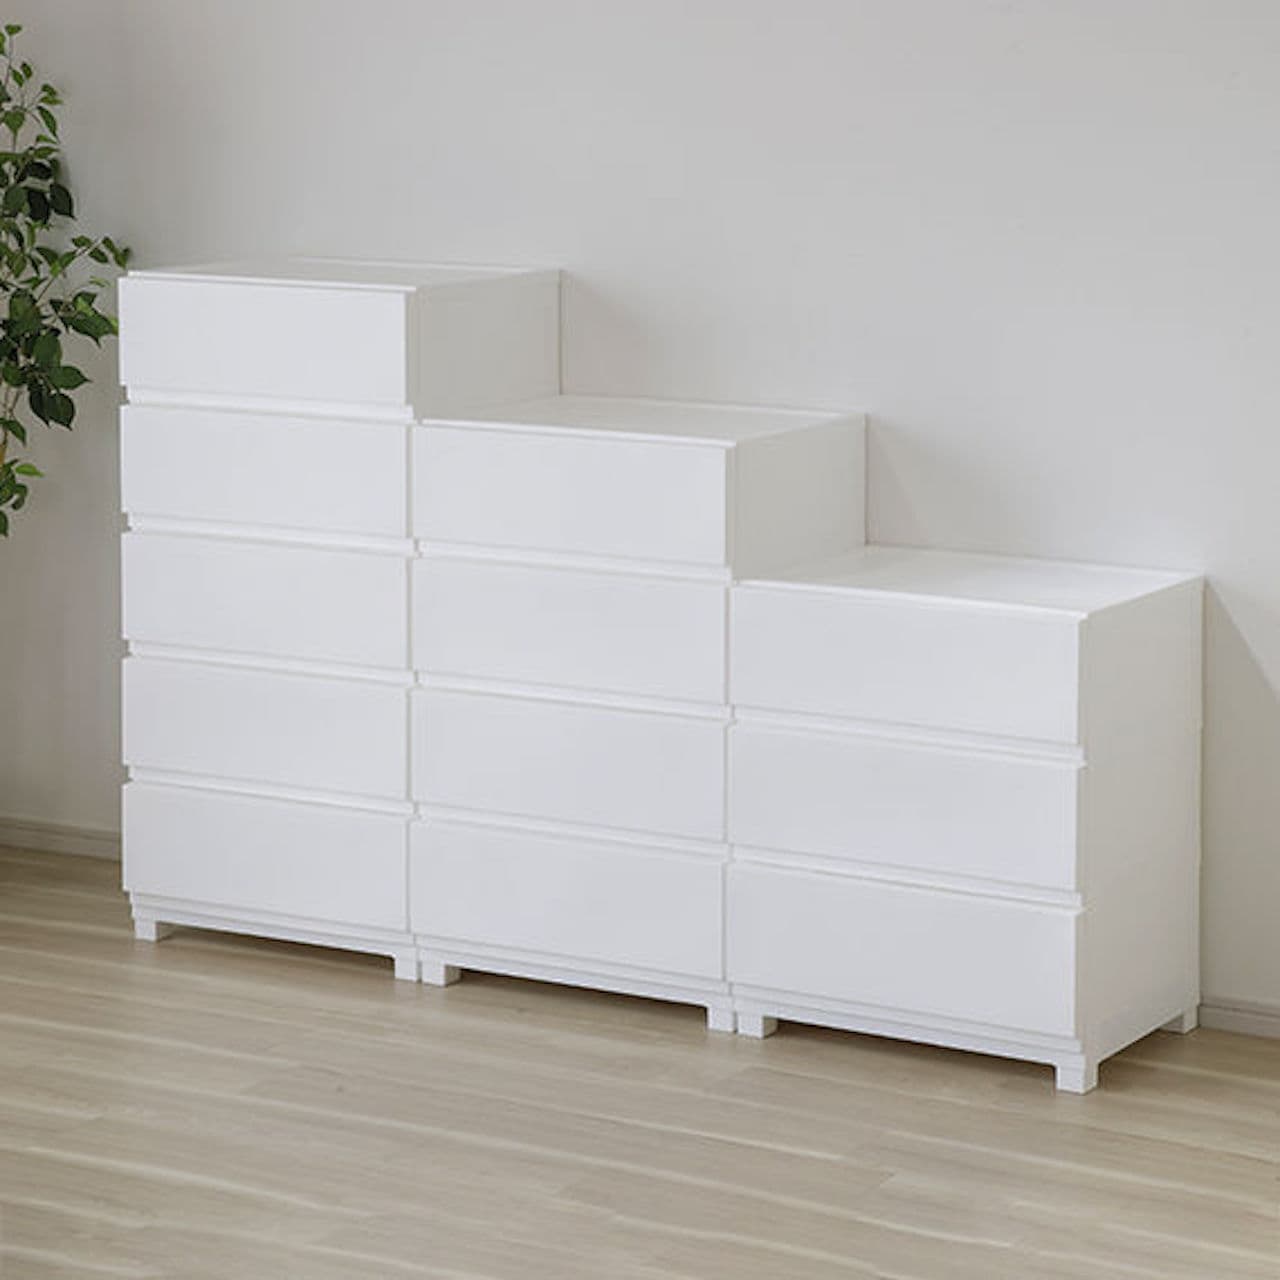 Nitori Storage Products "Easy-to-Assemble Wide Chest with Wall PC Decony without Tools" New